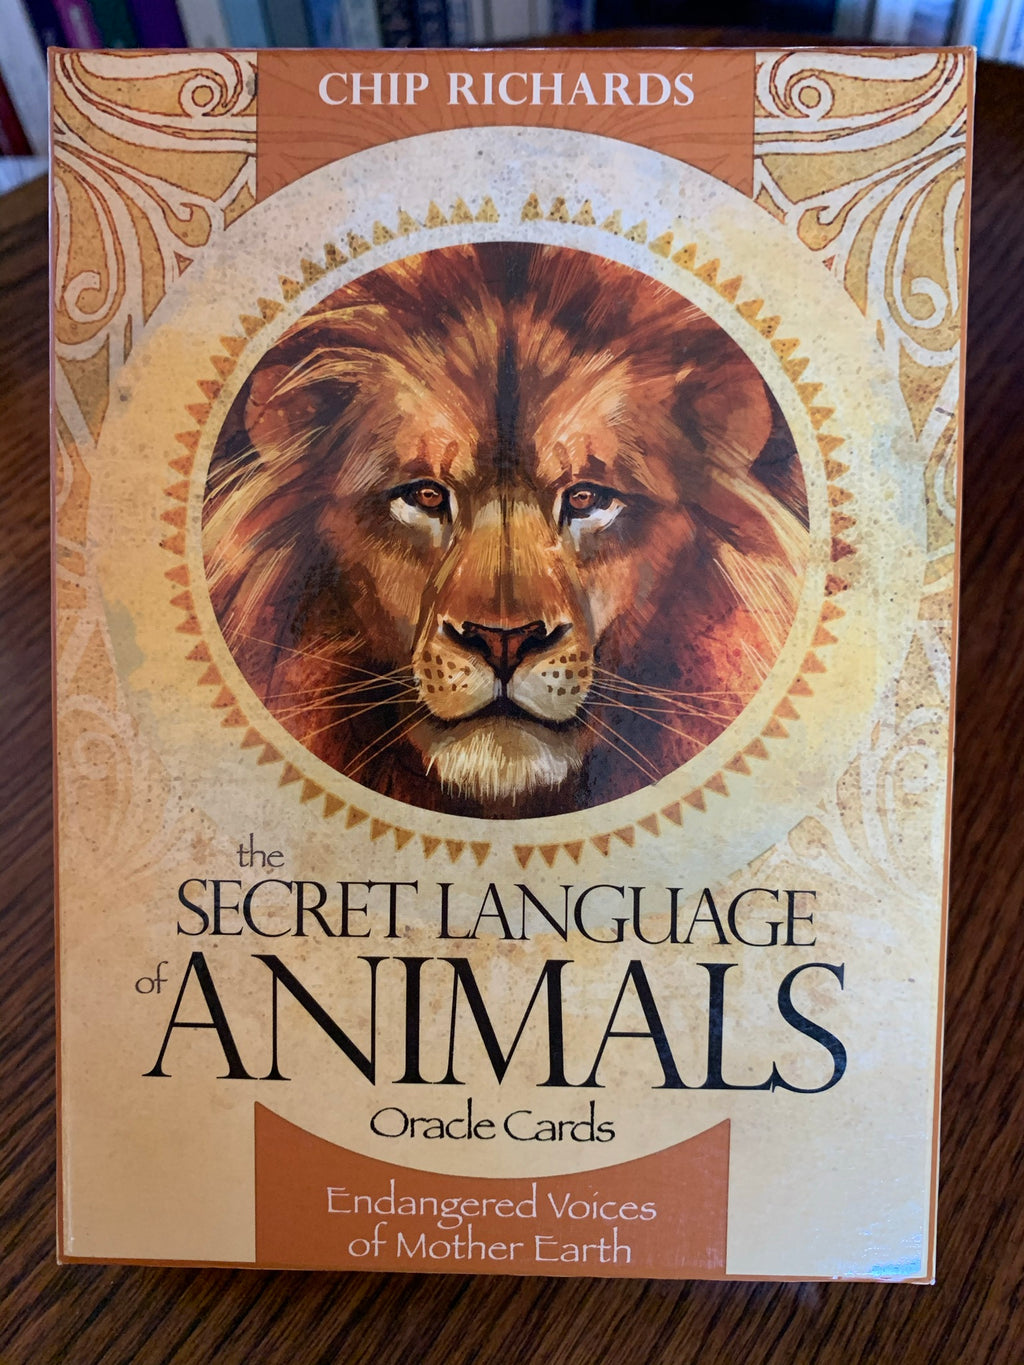 The Secret Language of Animals is a deck that lends guidance and wisdom to your life journey. Chip Richards, created this deck "as a pathway for individuals and families to expand their sense of connection with the natural world and awaken to their unique gifts and higher purpose in the great creation story of life." Set includes 46 cards, a guidebook and a box for storage. What I love about this deck is that the animals he has chosen are all either endangered, critically endangered or vulnerable.